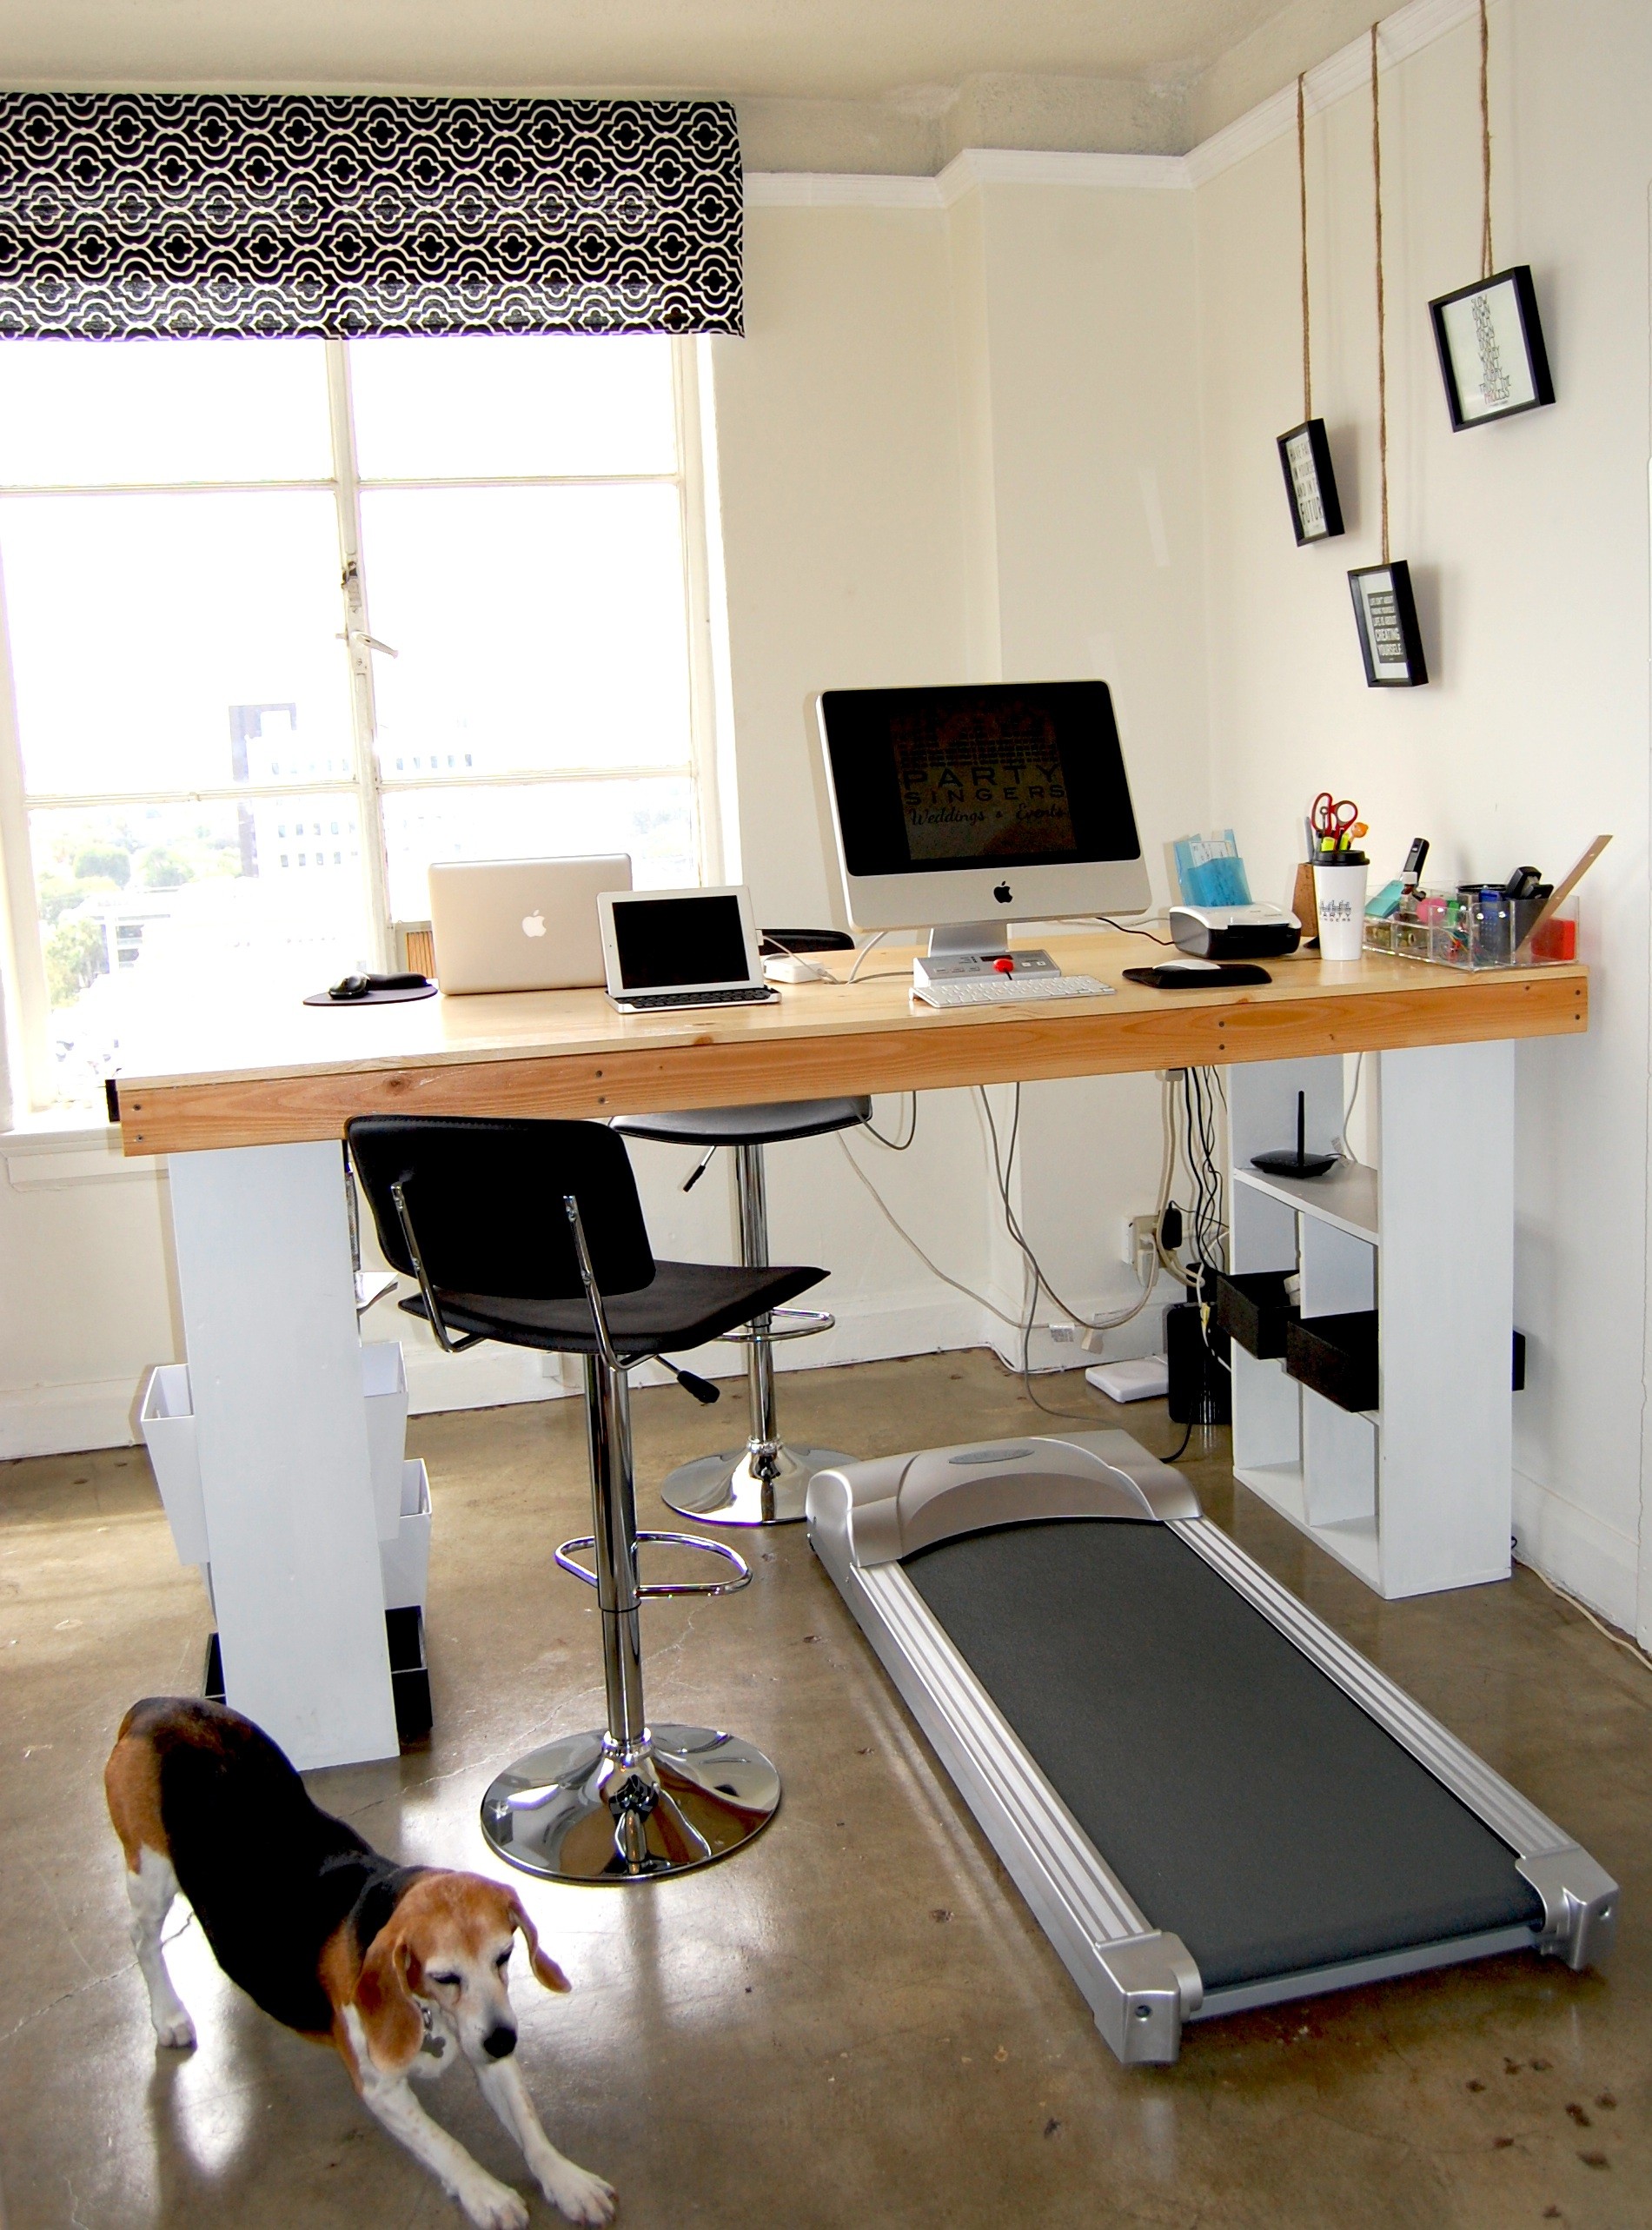 Build Your Own Treadmill Desk And Save The Homestead Survival